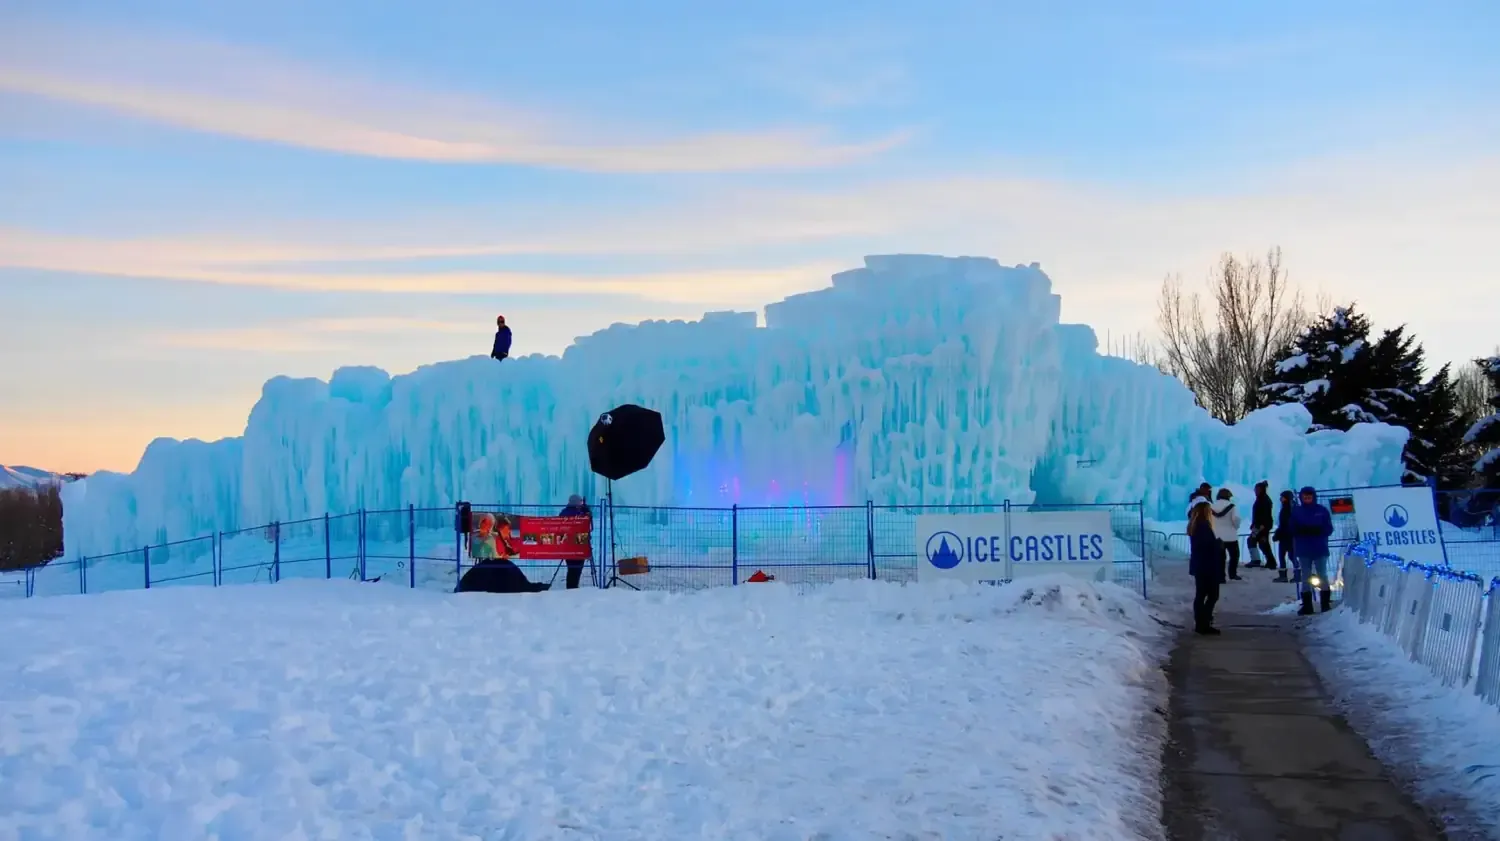 Approaching the entrance to the ice castles